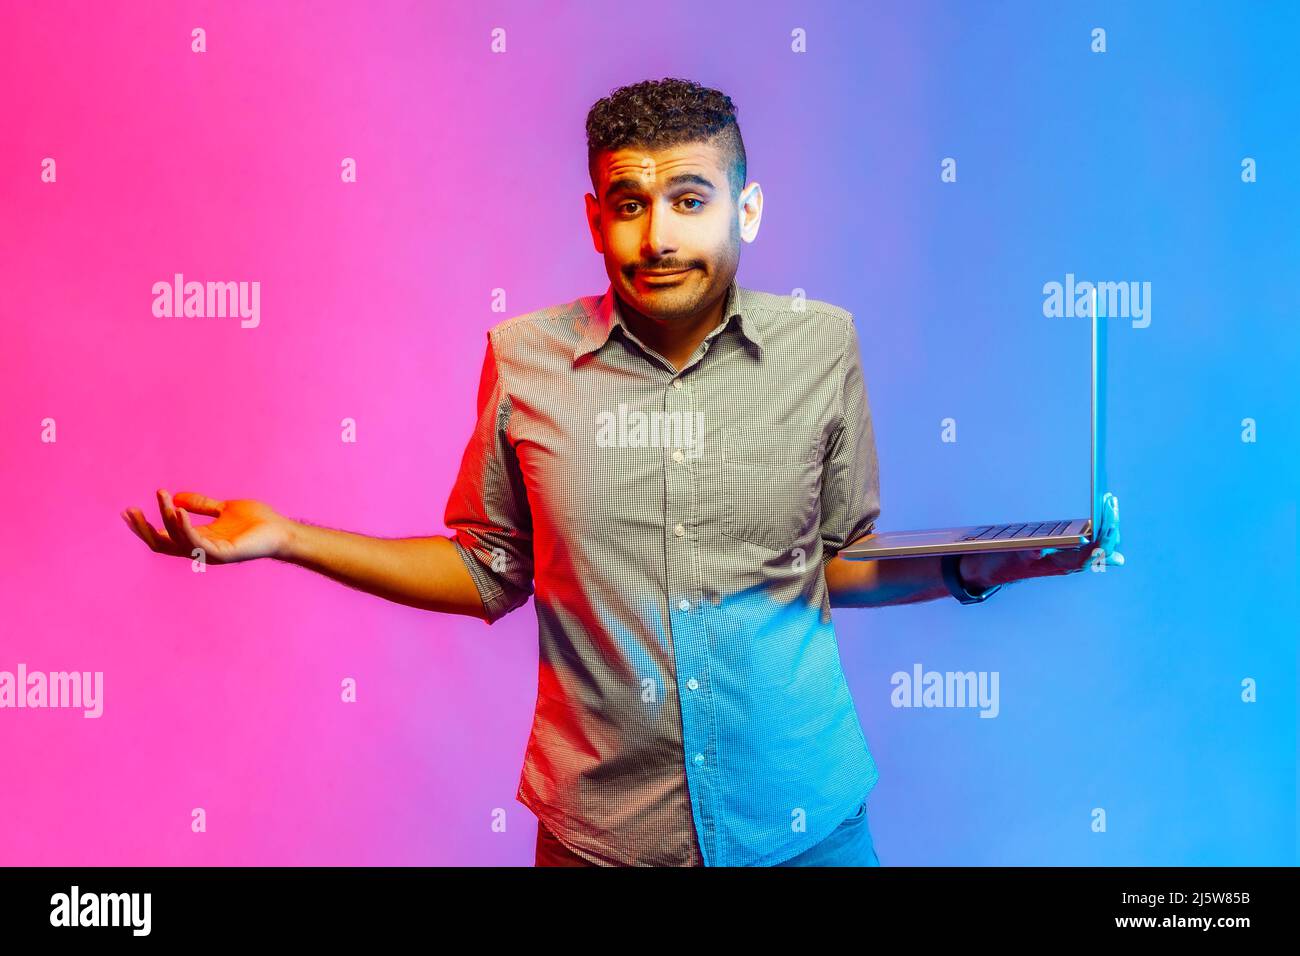 Portrait of puzzled handsome man in shirt standing holding laptop and shrugging, don't know what to do with new project. Indoor studio shot isolated on colorful neon light background. Stock Photo